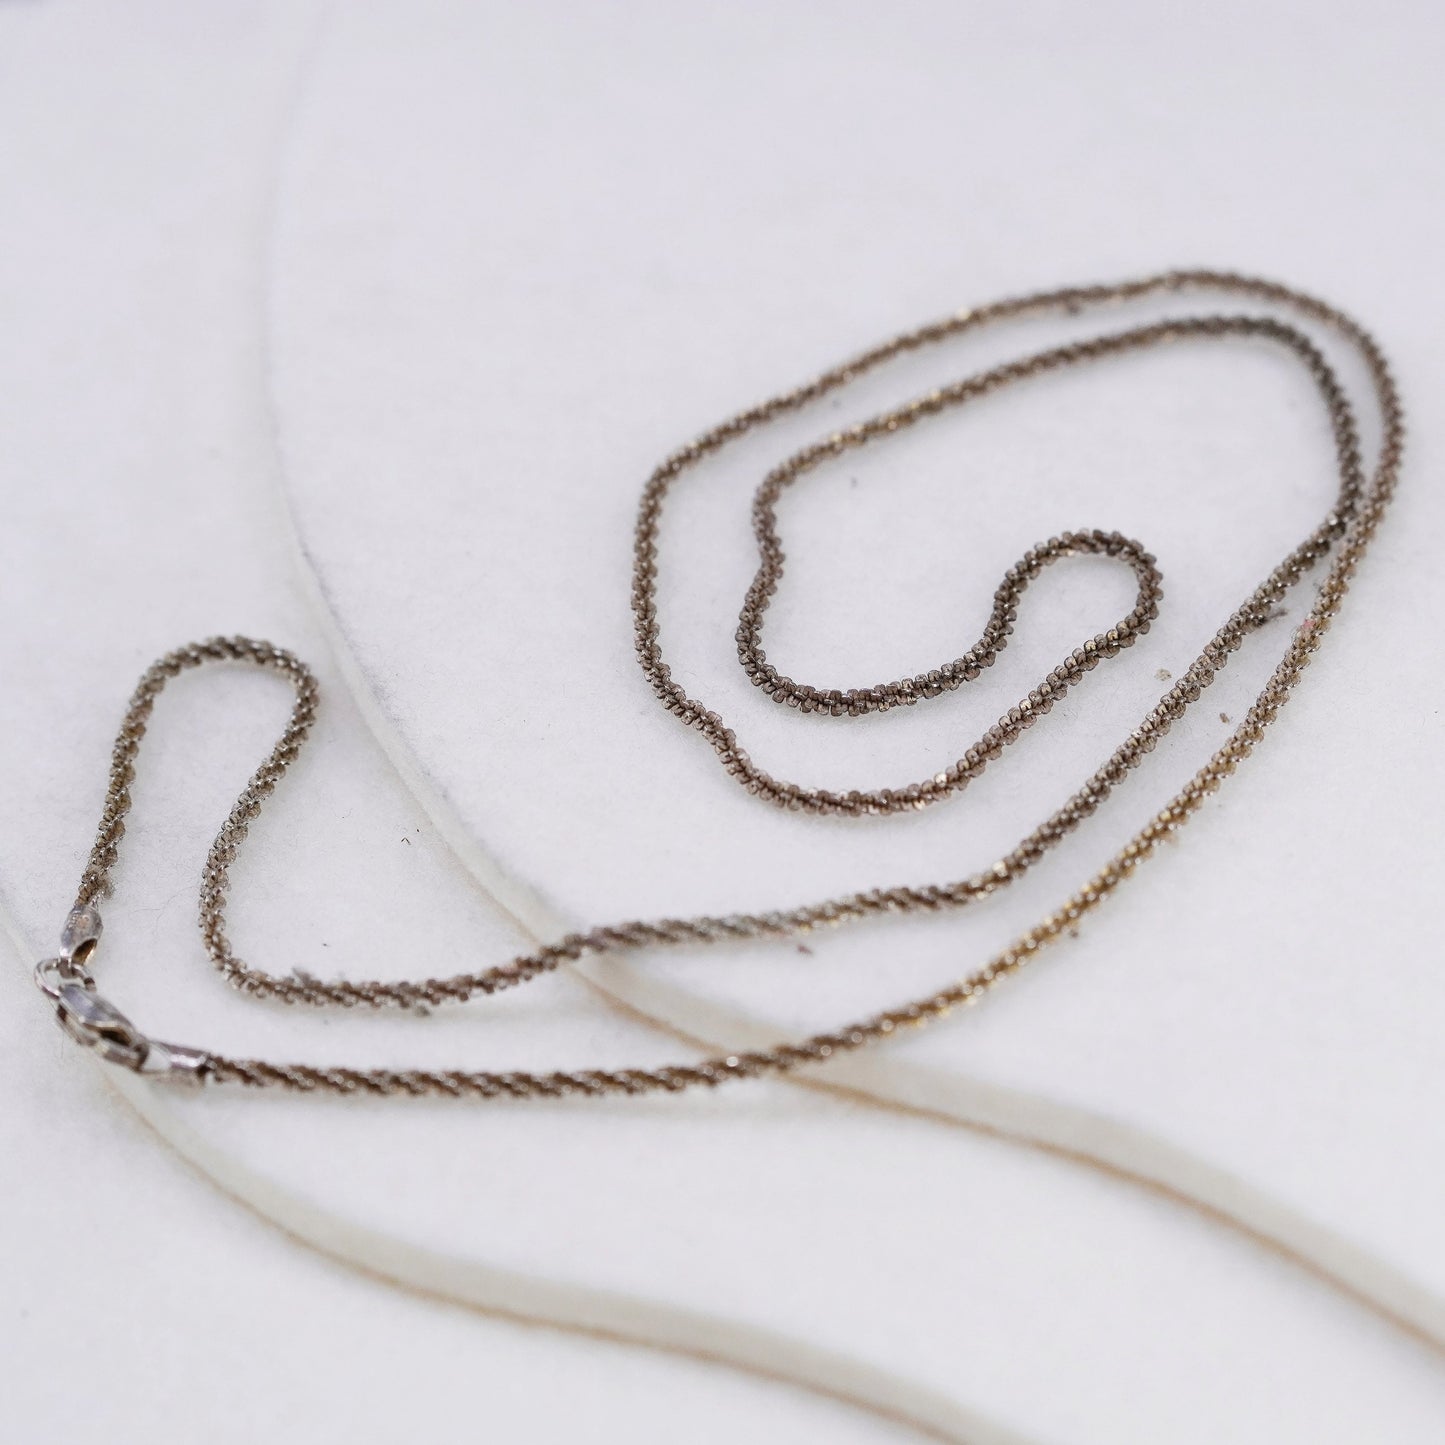 24” 2mm, vintage Italy Sterling 925 silver twisted chain necklace